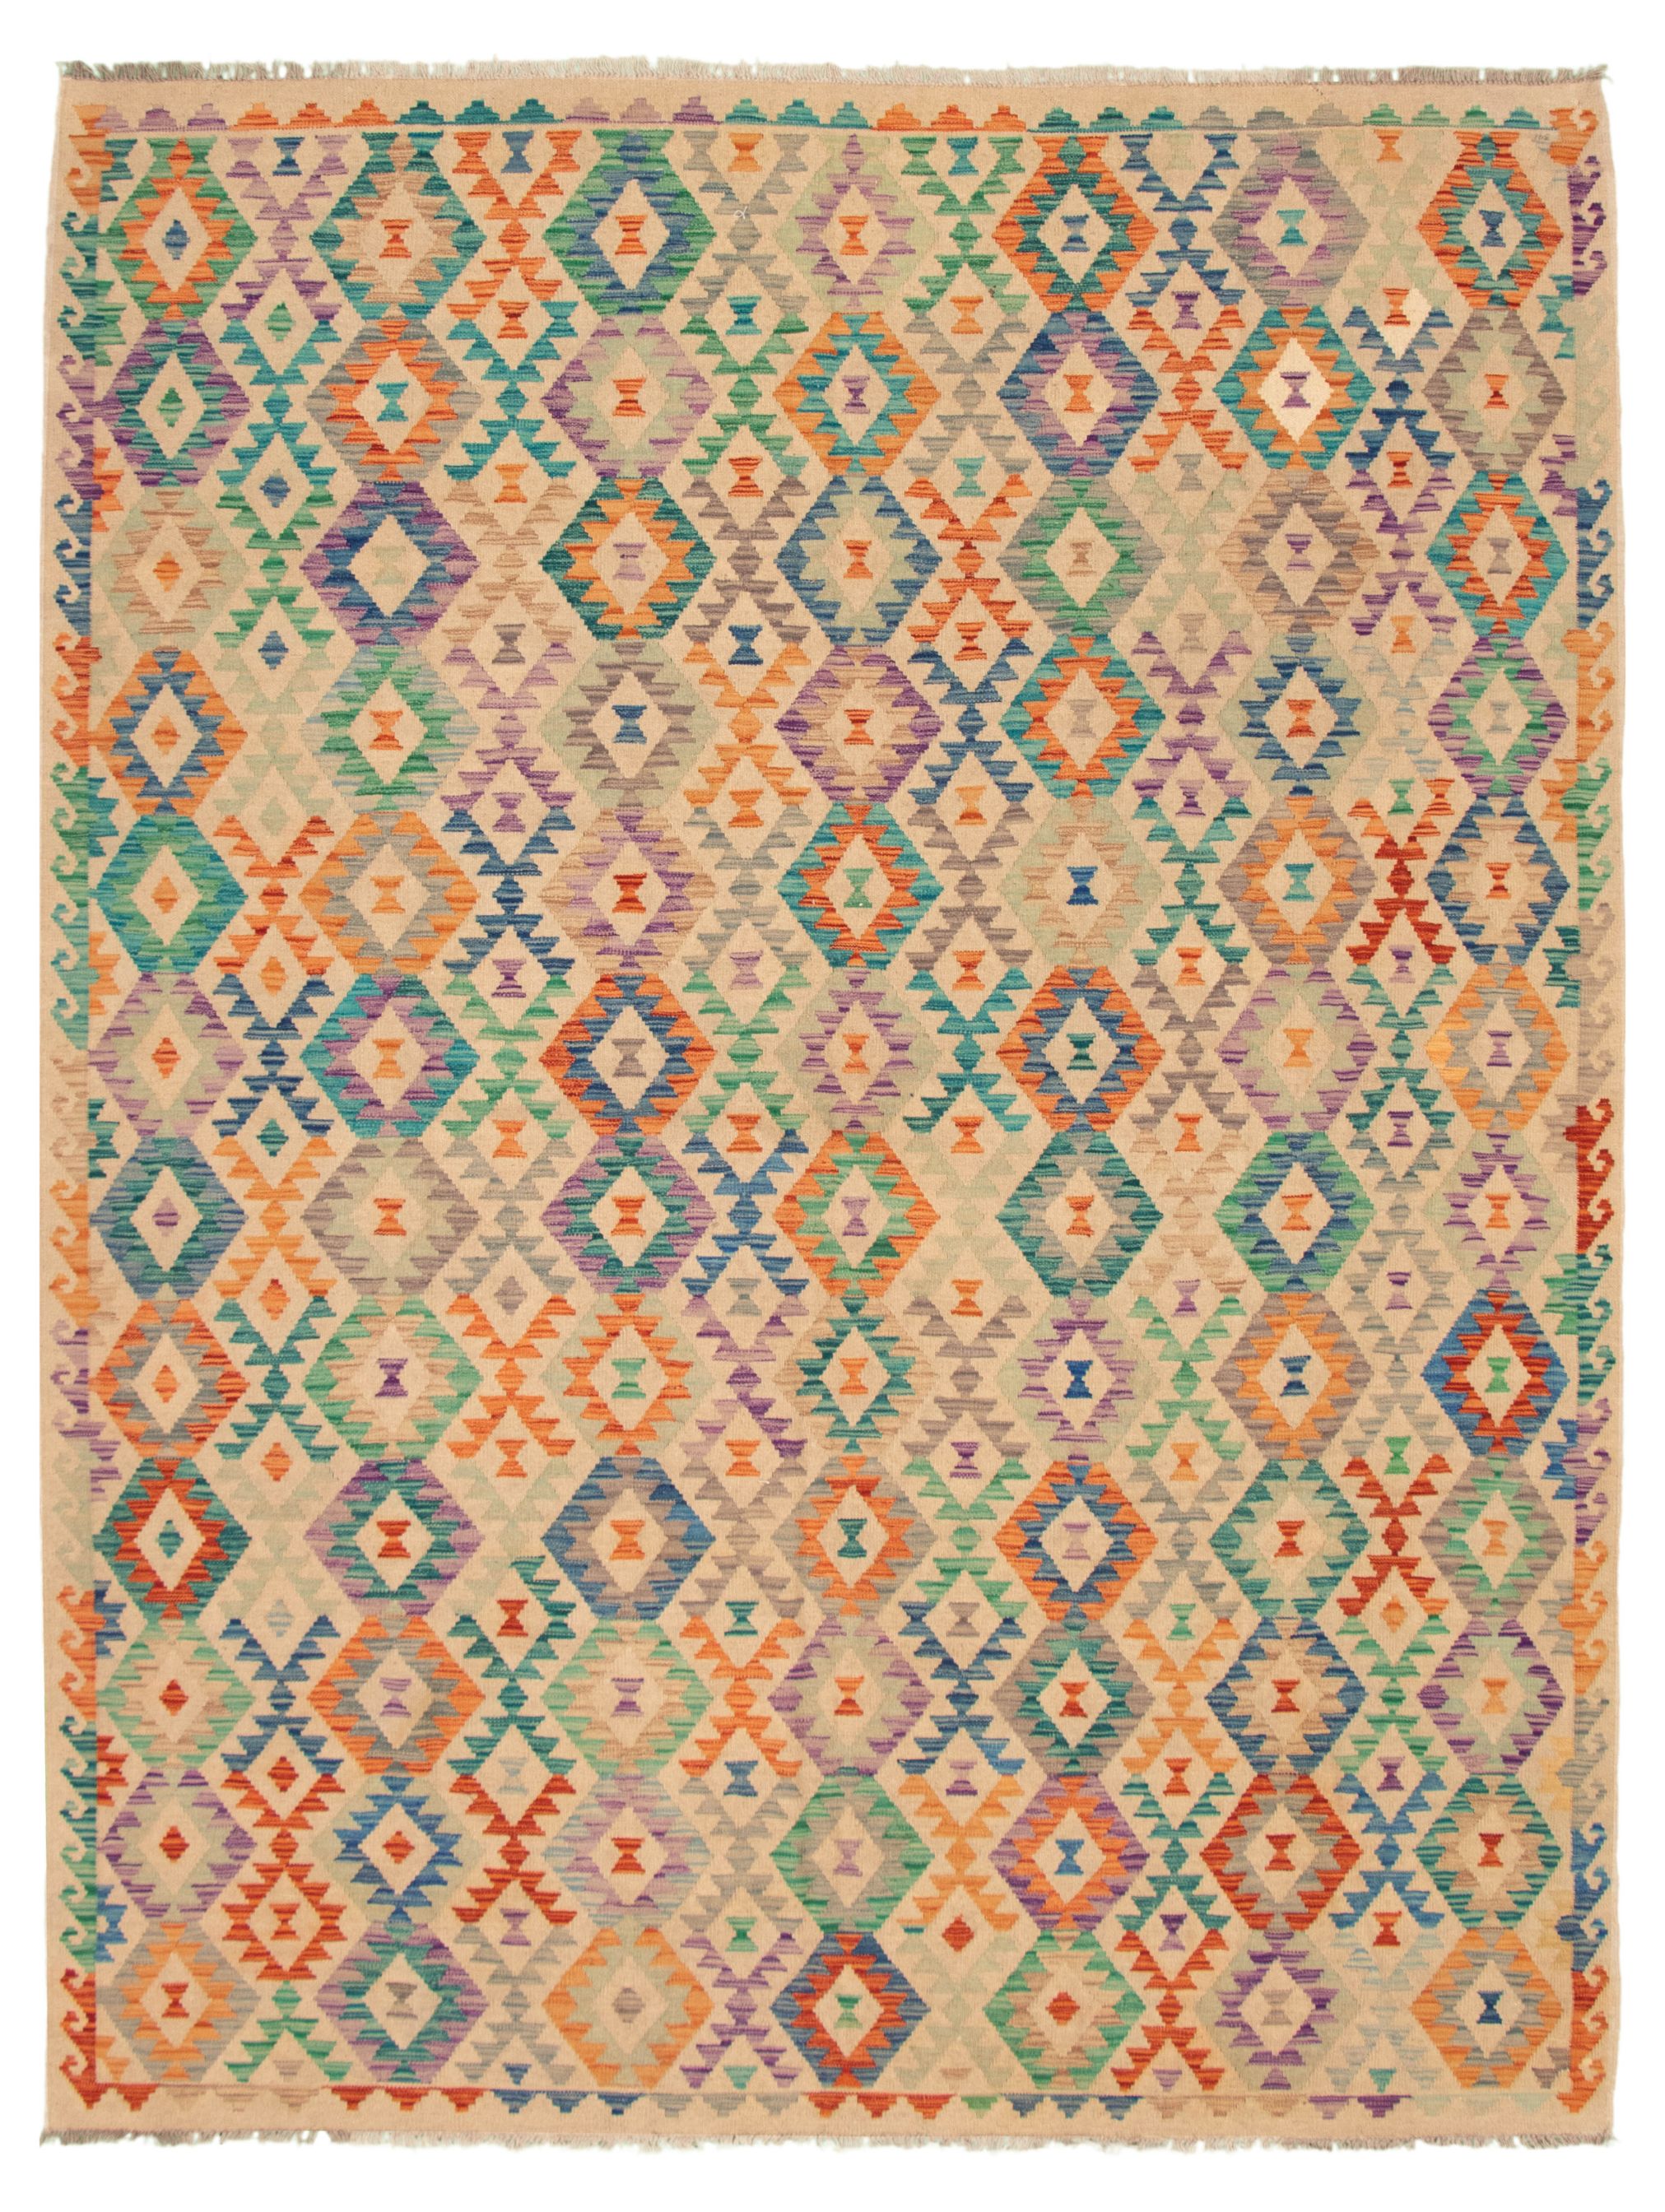 Hand woven Bold and Colorful  Ivory Wool Kilim 8'6" x 11'2" Size: 8'6" x 11'2"  